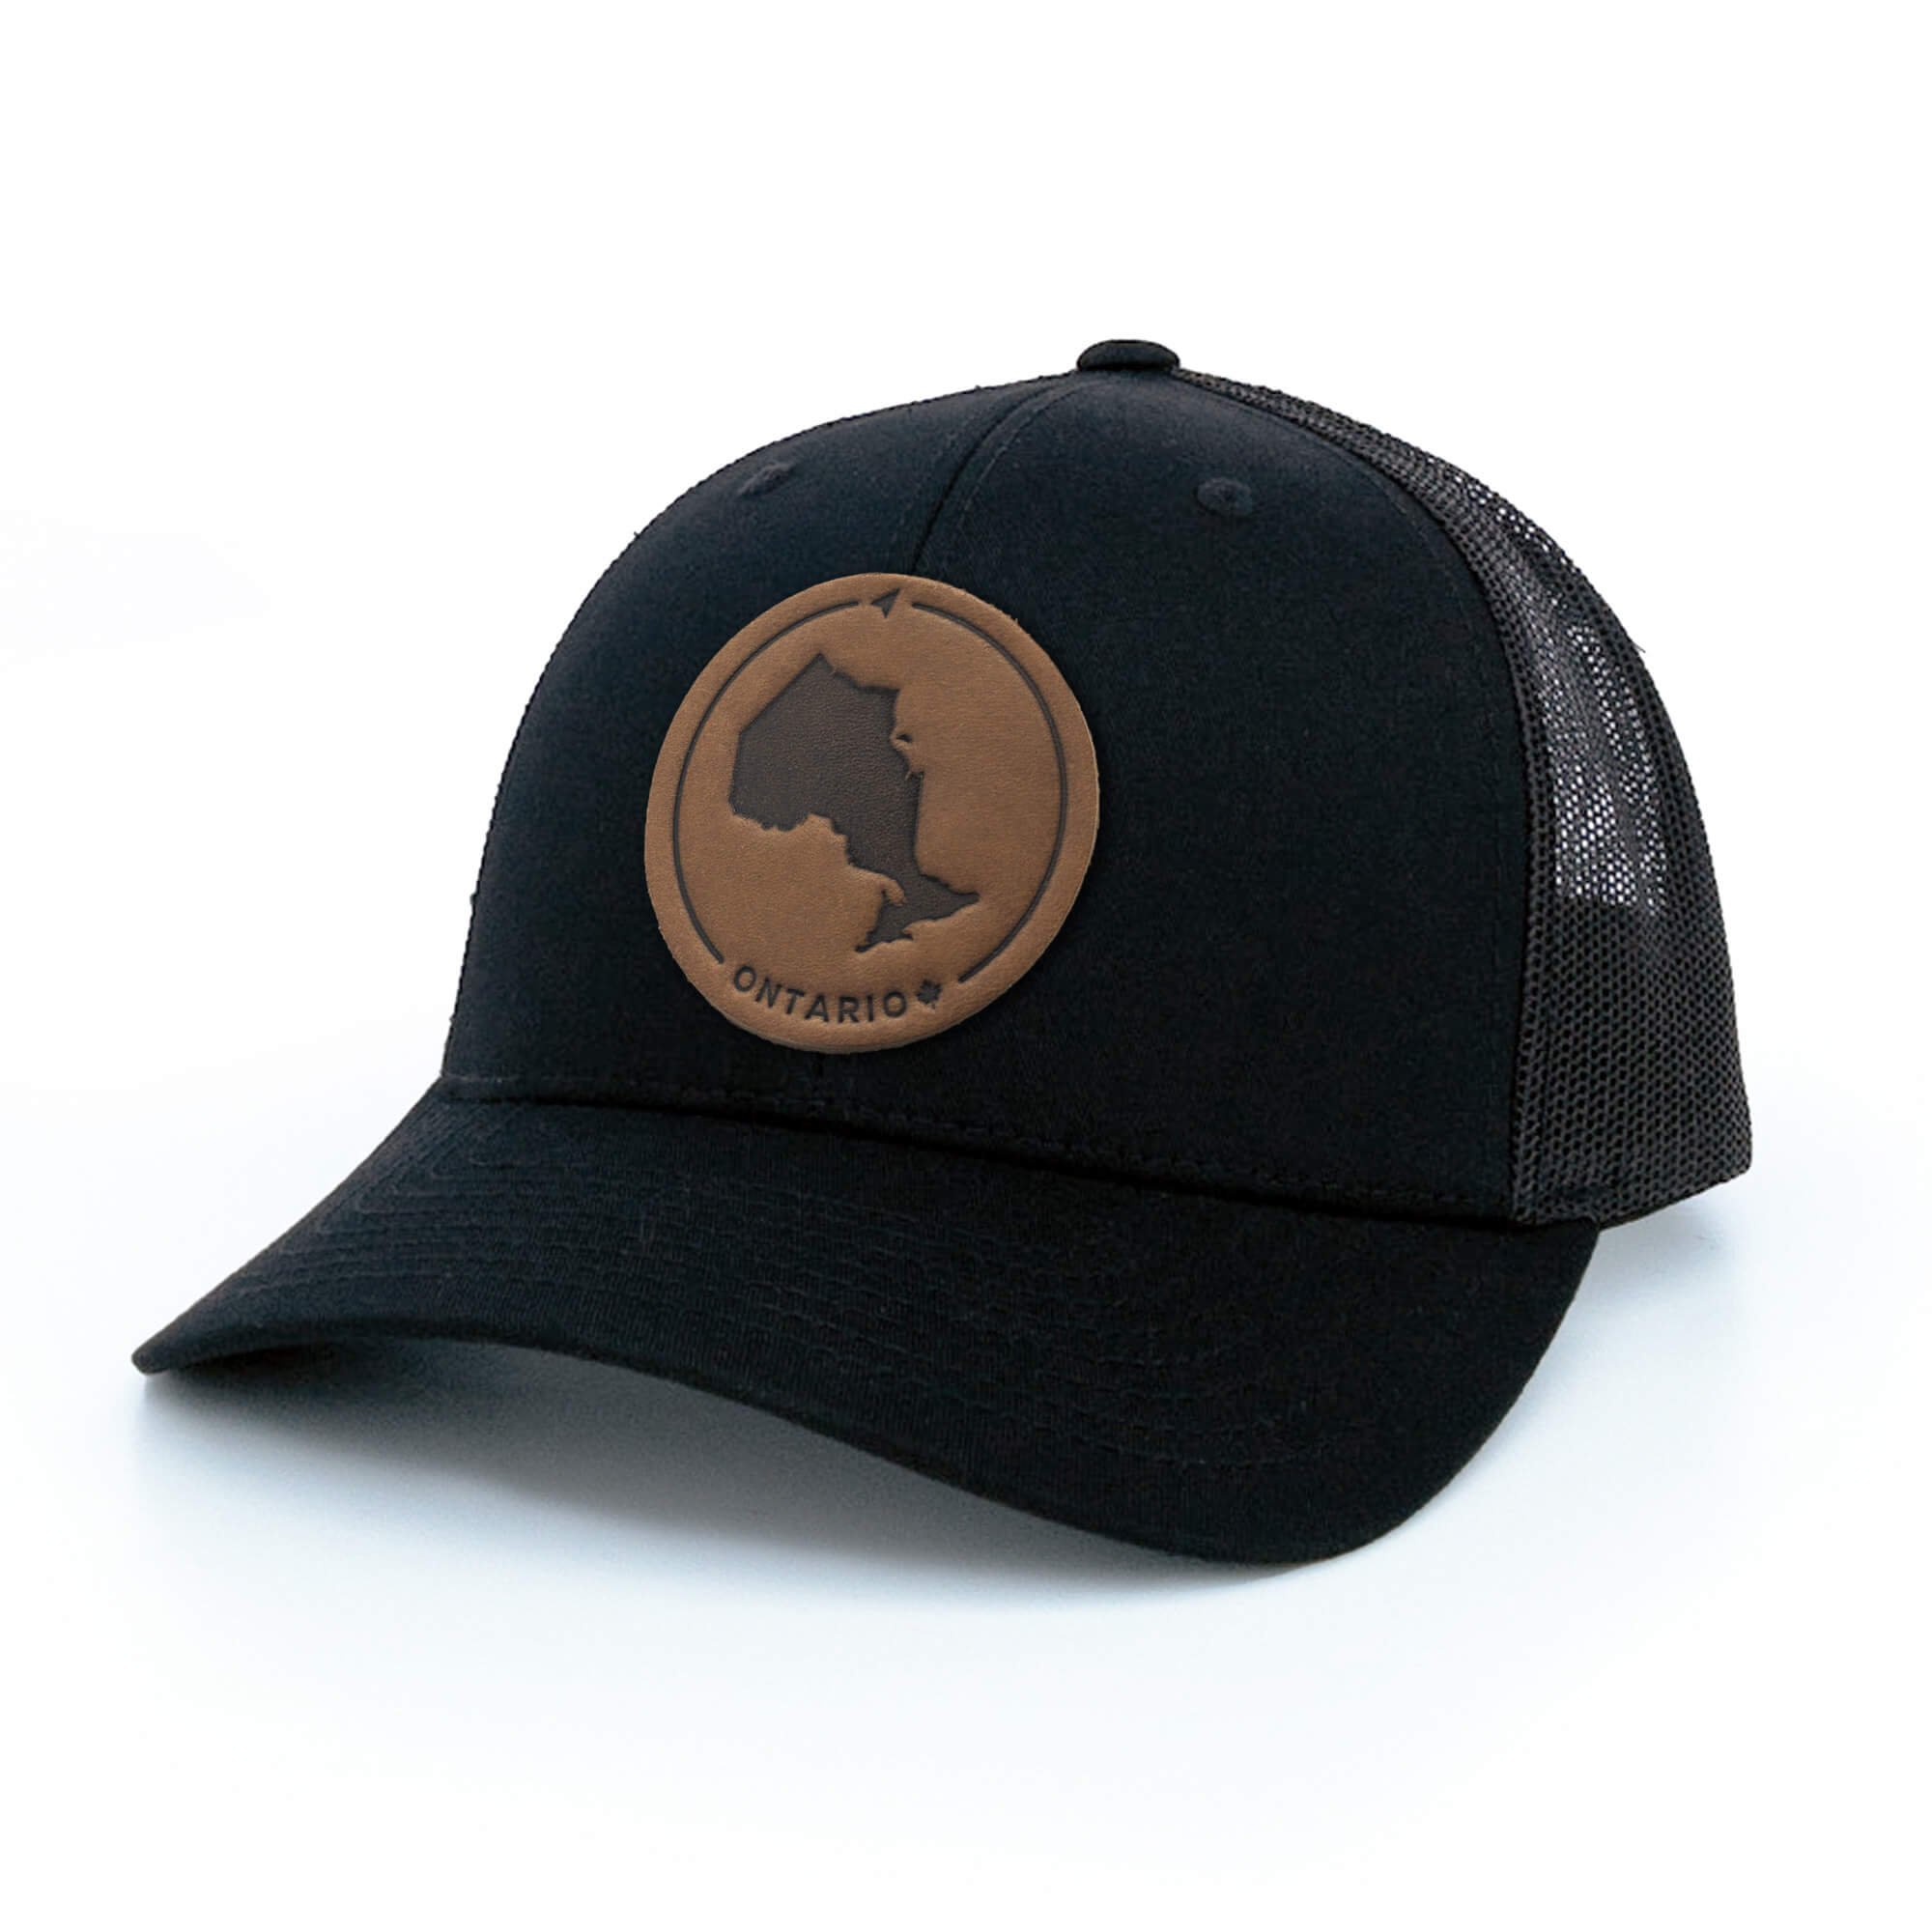 Black trucker hat with full-grain leather patch of Ontario | BLACK-002-003, CHARC-002-003, NAVY-002-003, HGREY-002-003, MOSS-002-003, BROWN-002-003